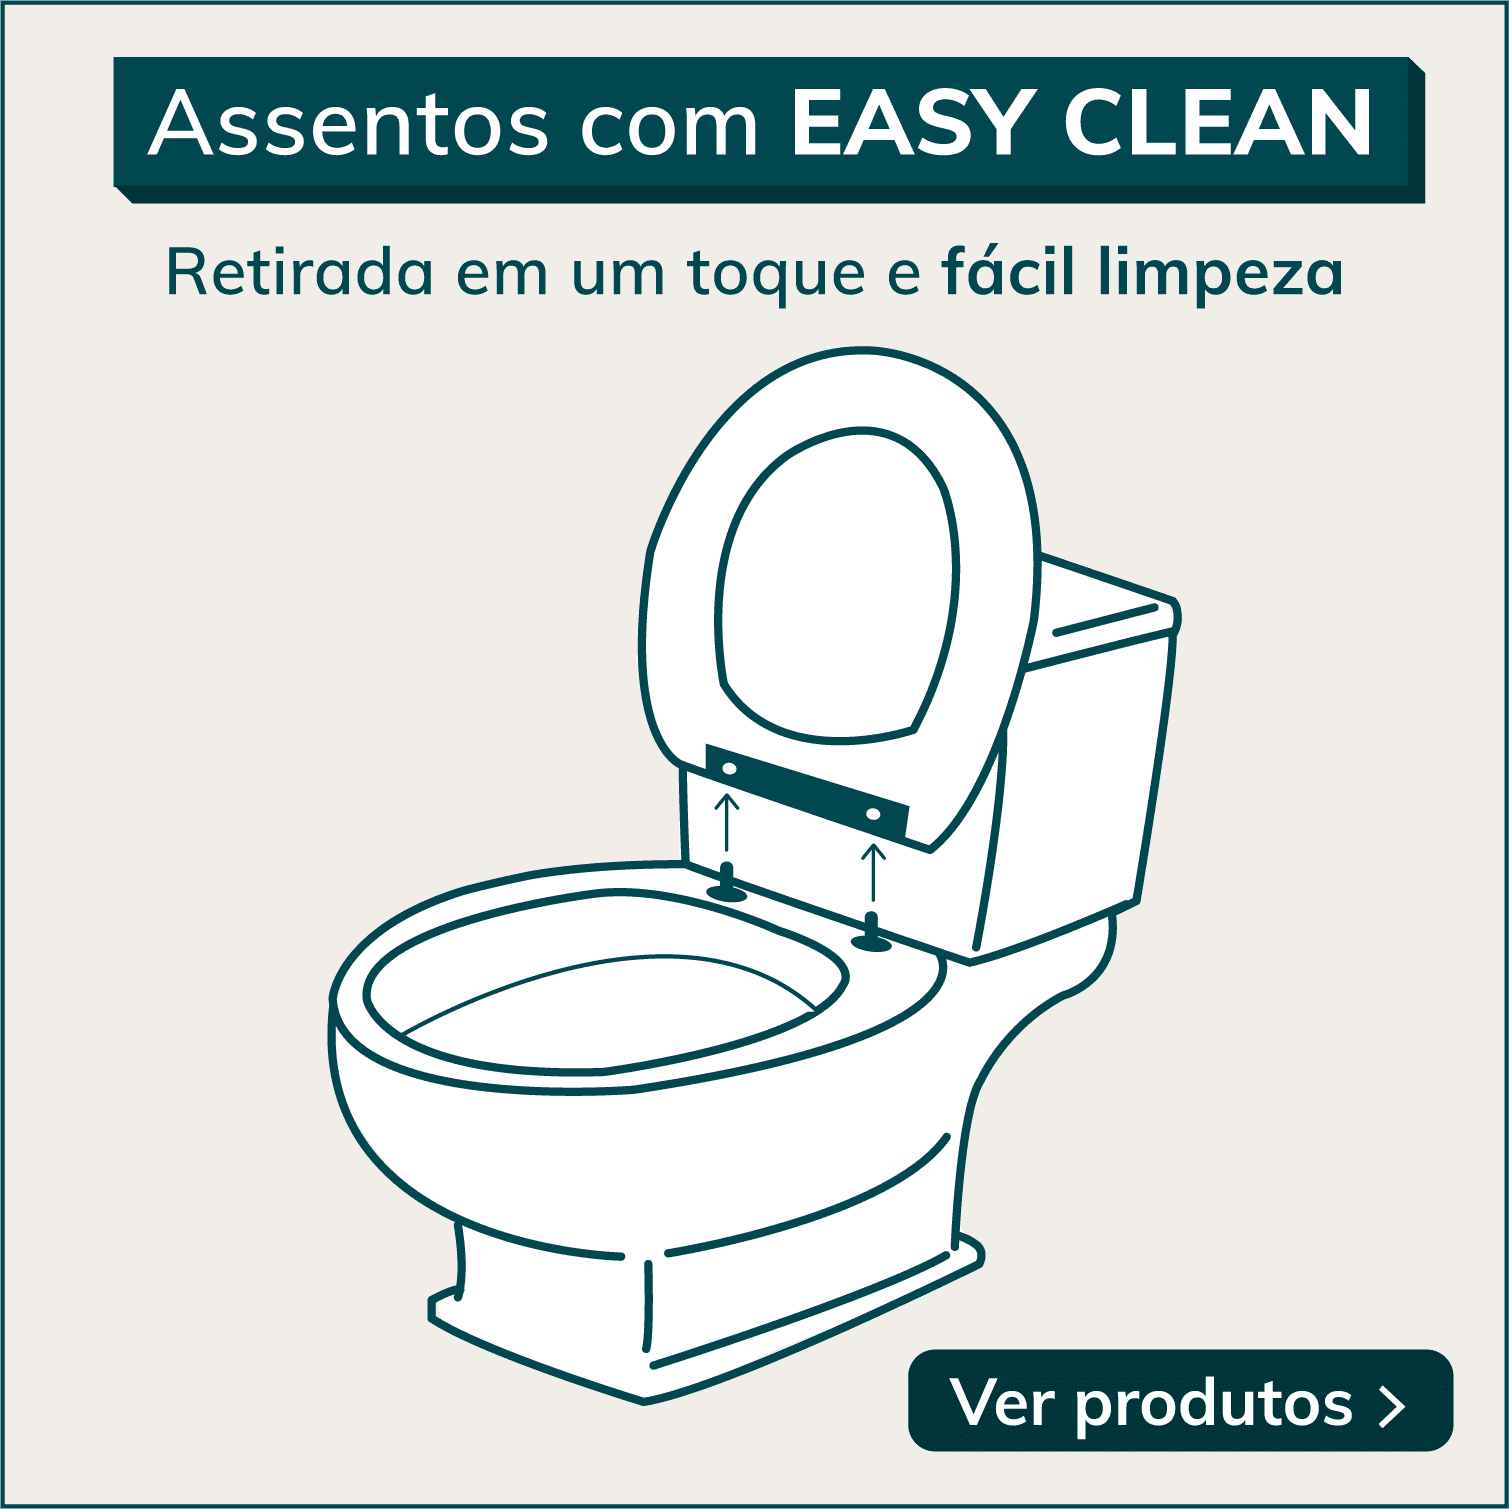 Assento easy clean